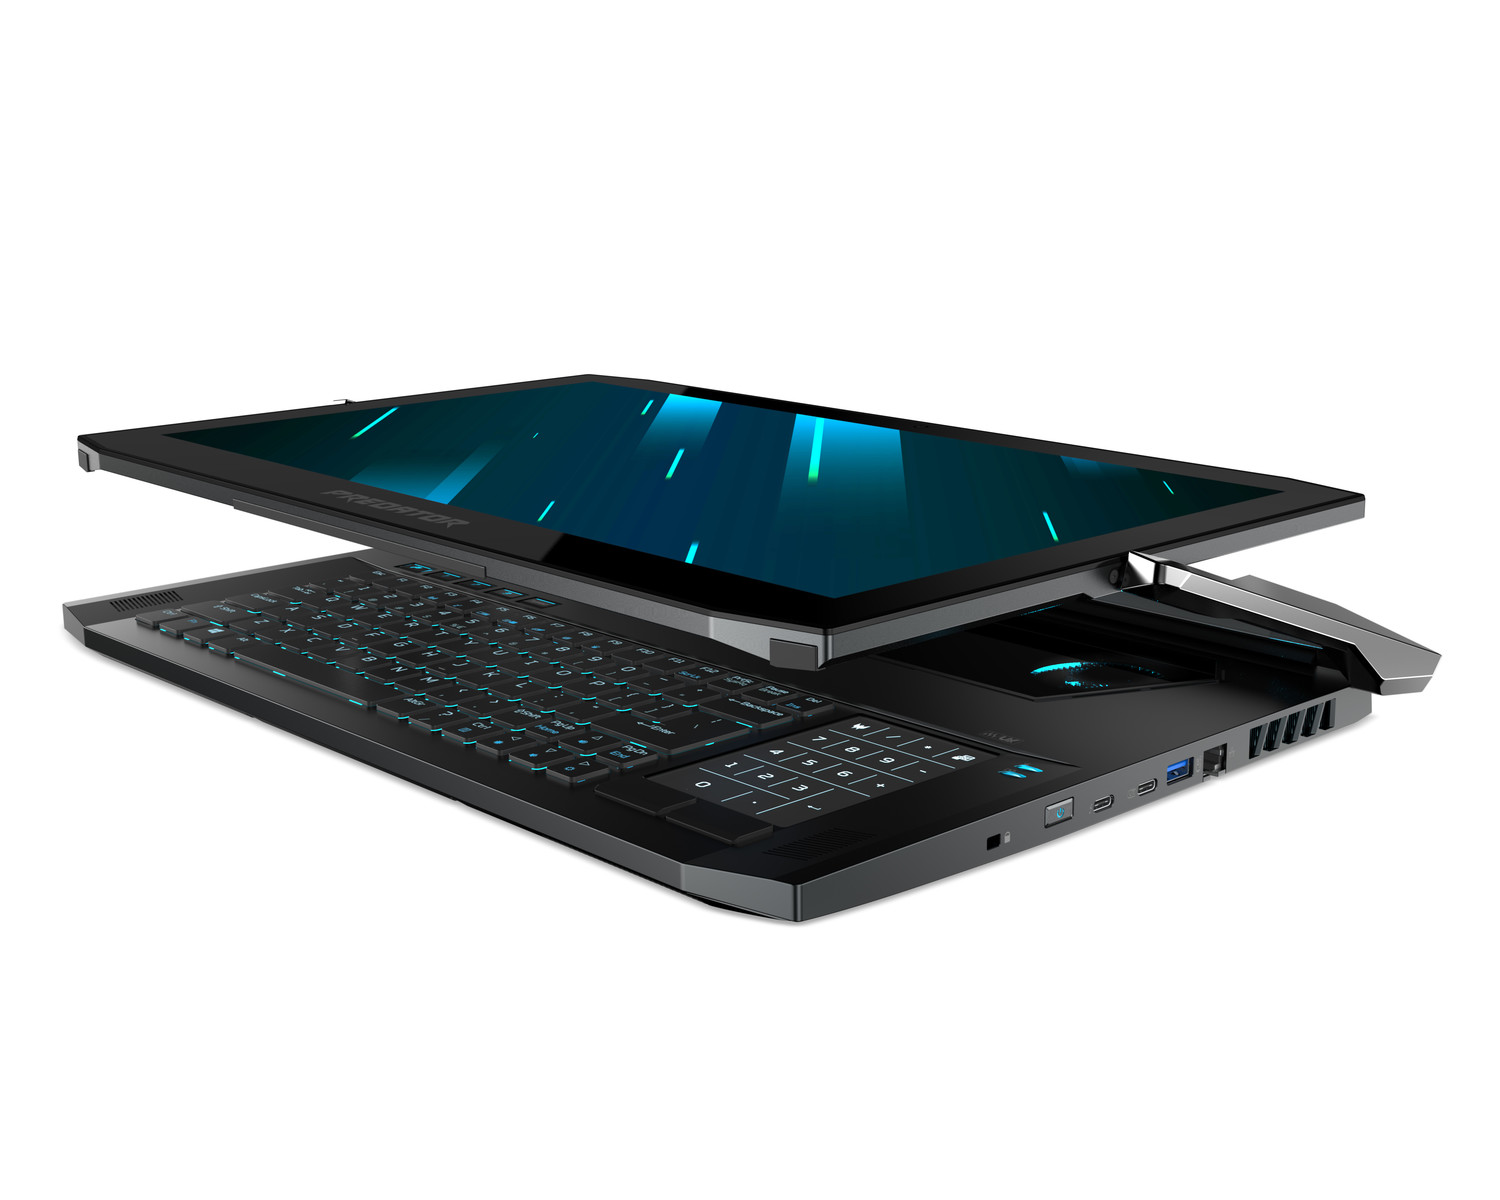 The Acer Predator Triton 900  packs powerful components in 